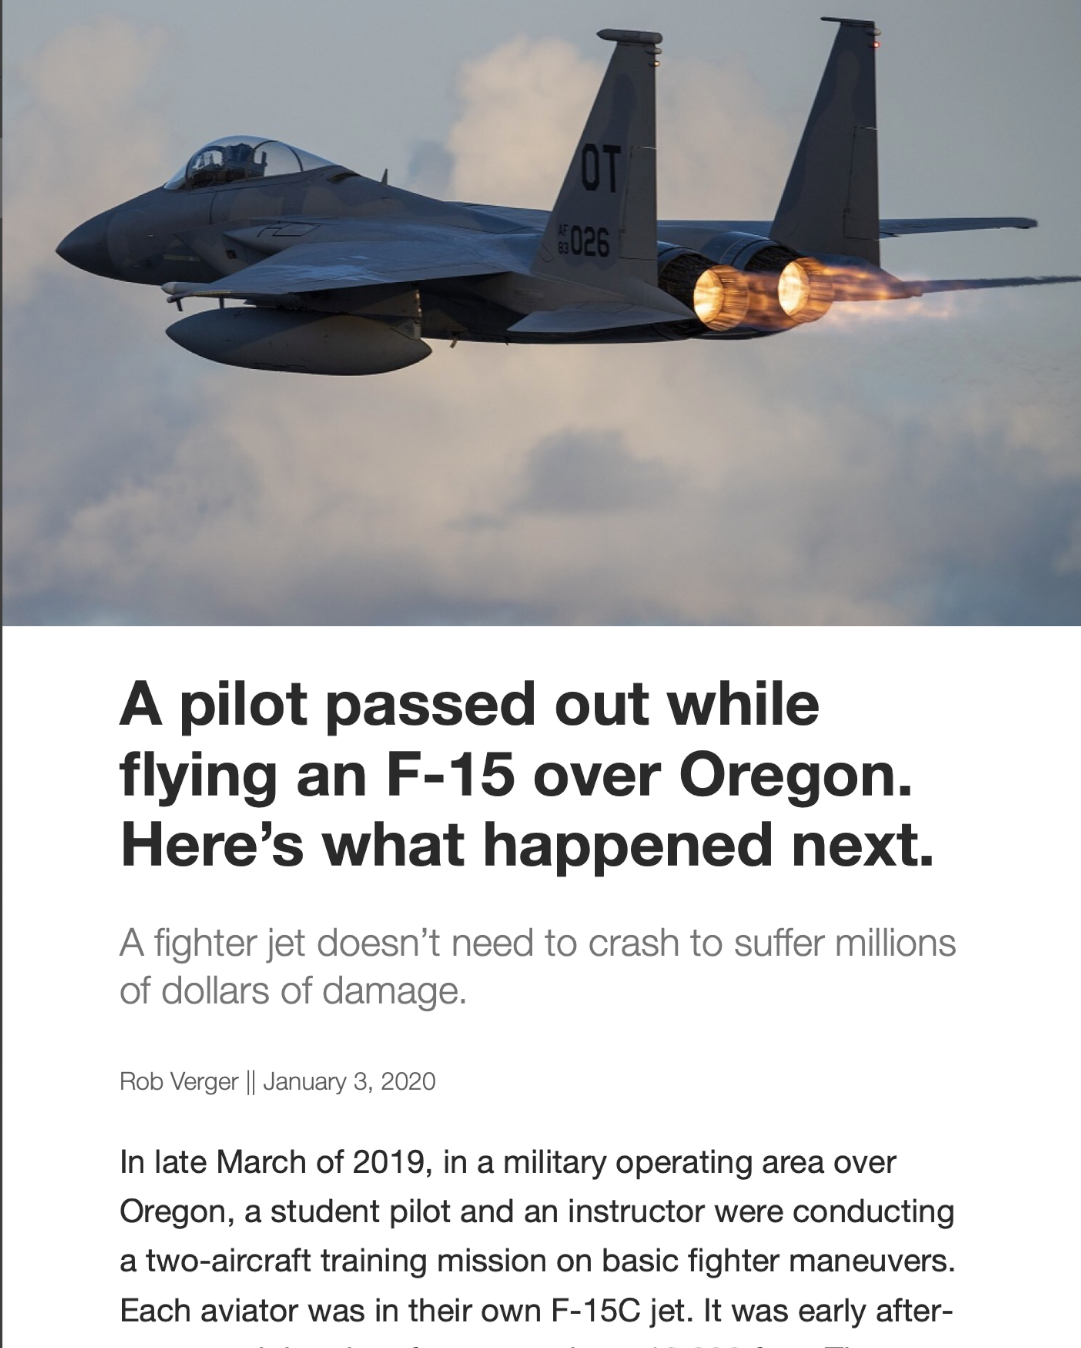 A Pilot Passed Out While Flying an F-15 Over Oregon